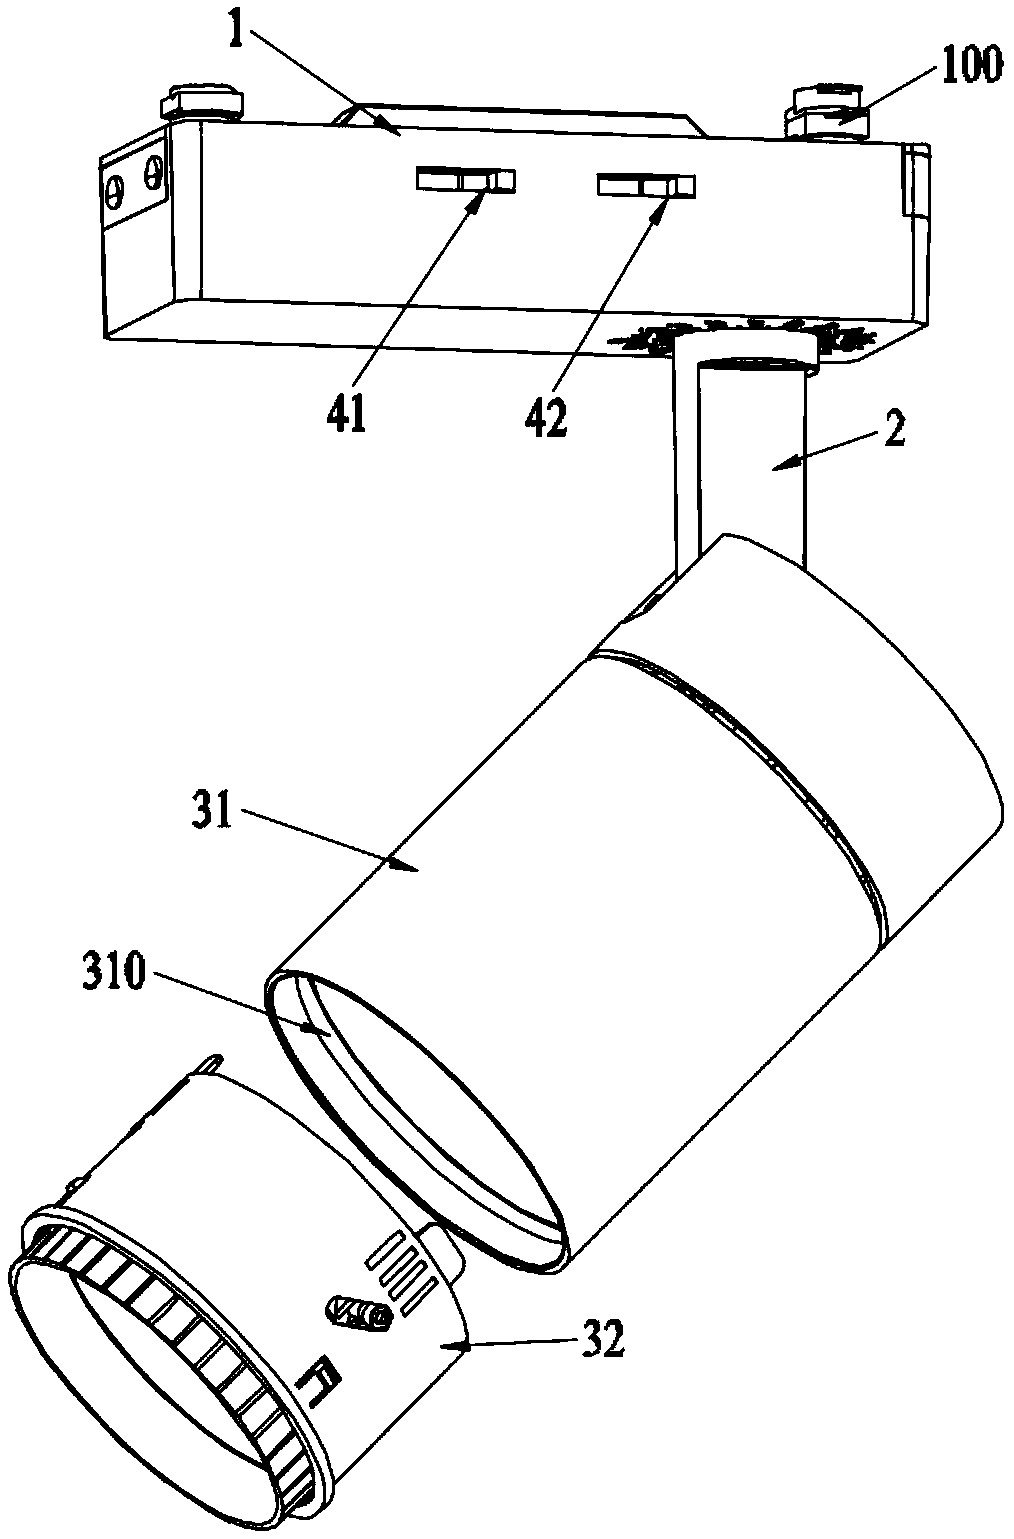 Focusing-type lamp with adjustable brightness and color temperature